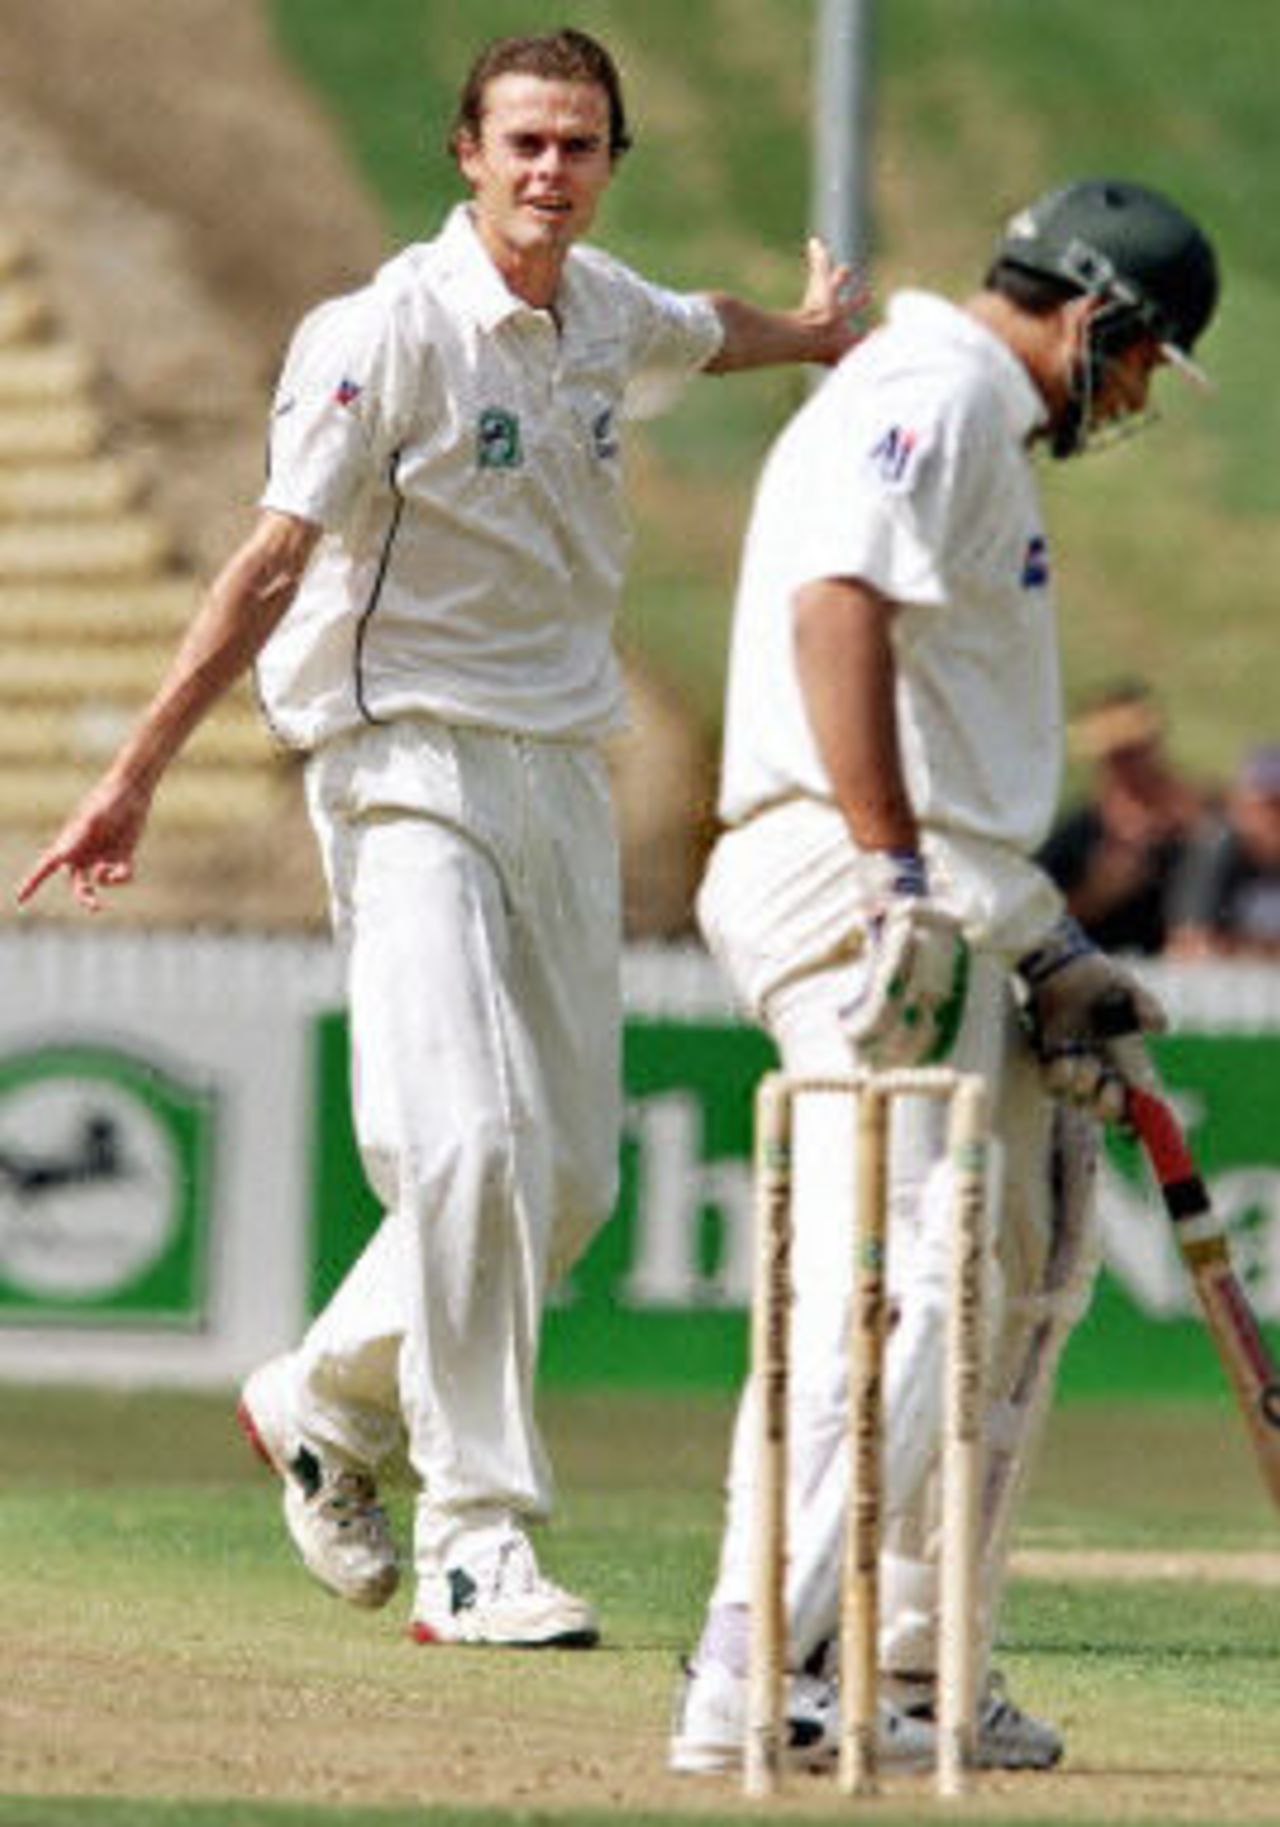 Chris Martin celebrates taking the wicket of Inzamam-ul-Haq, day 1, 3rd Test at Hamilton, 27-31 March 2001.